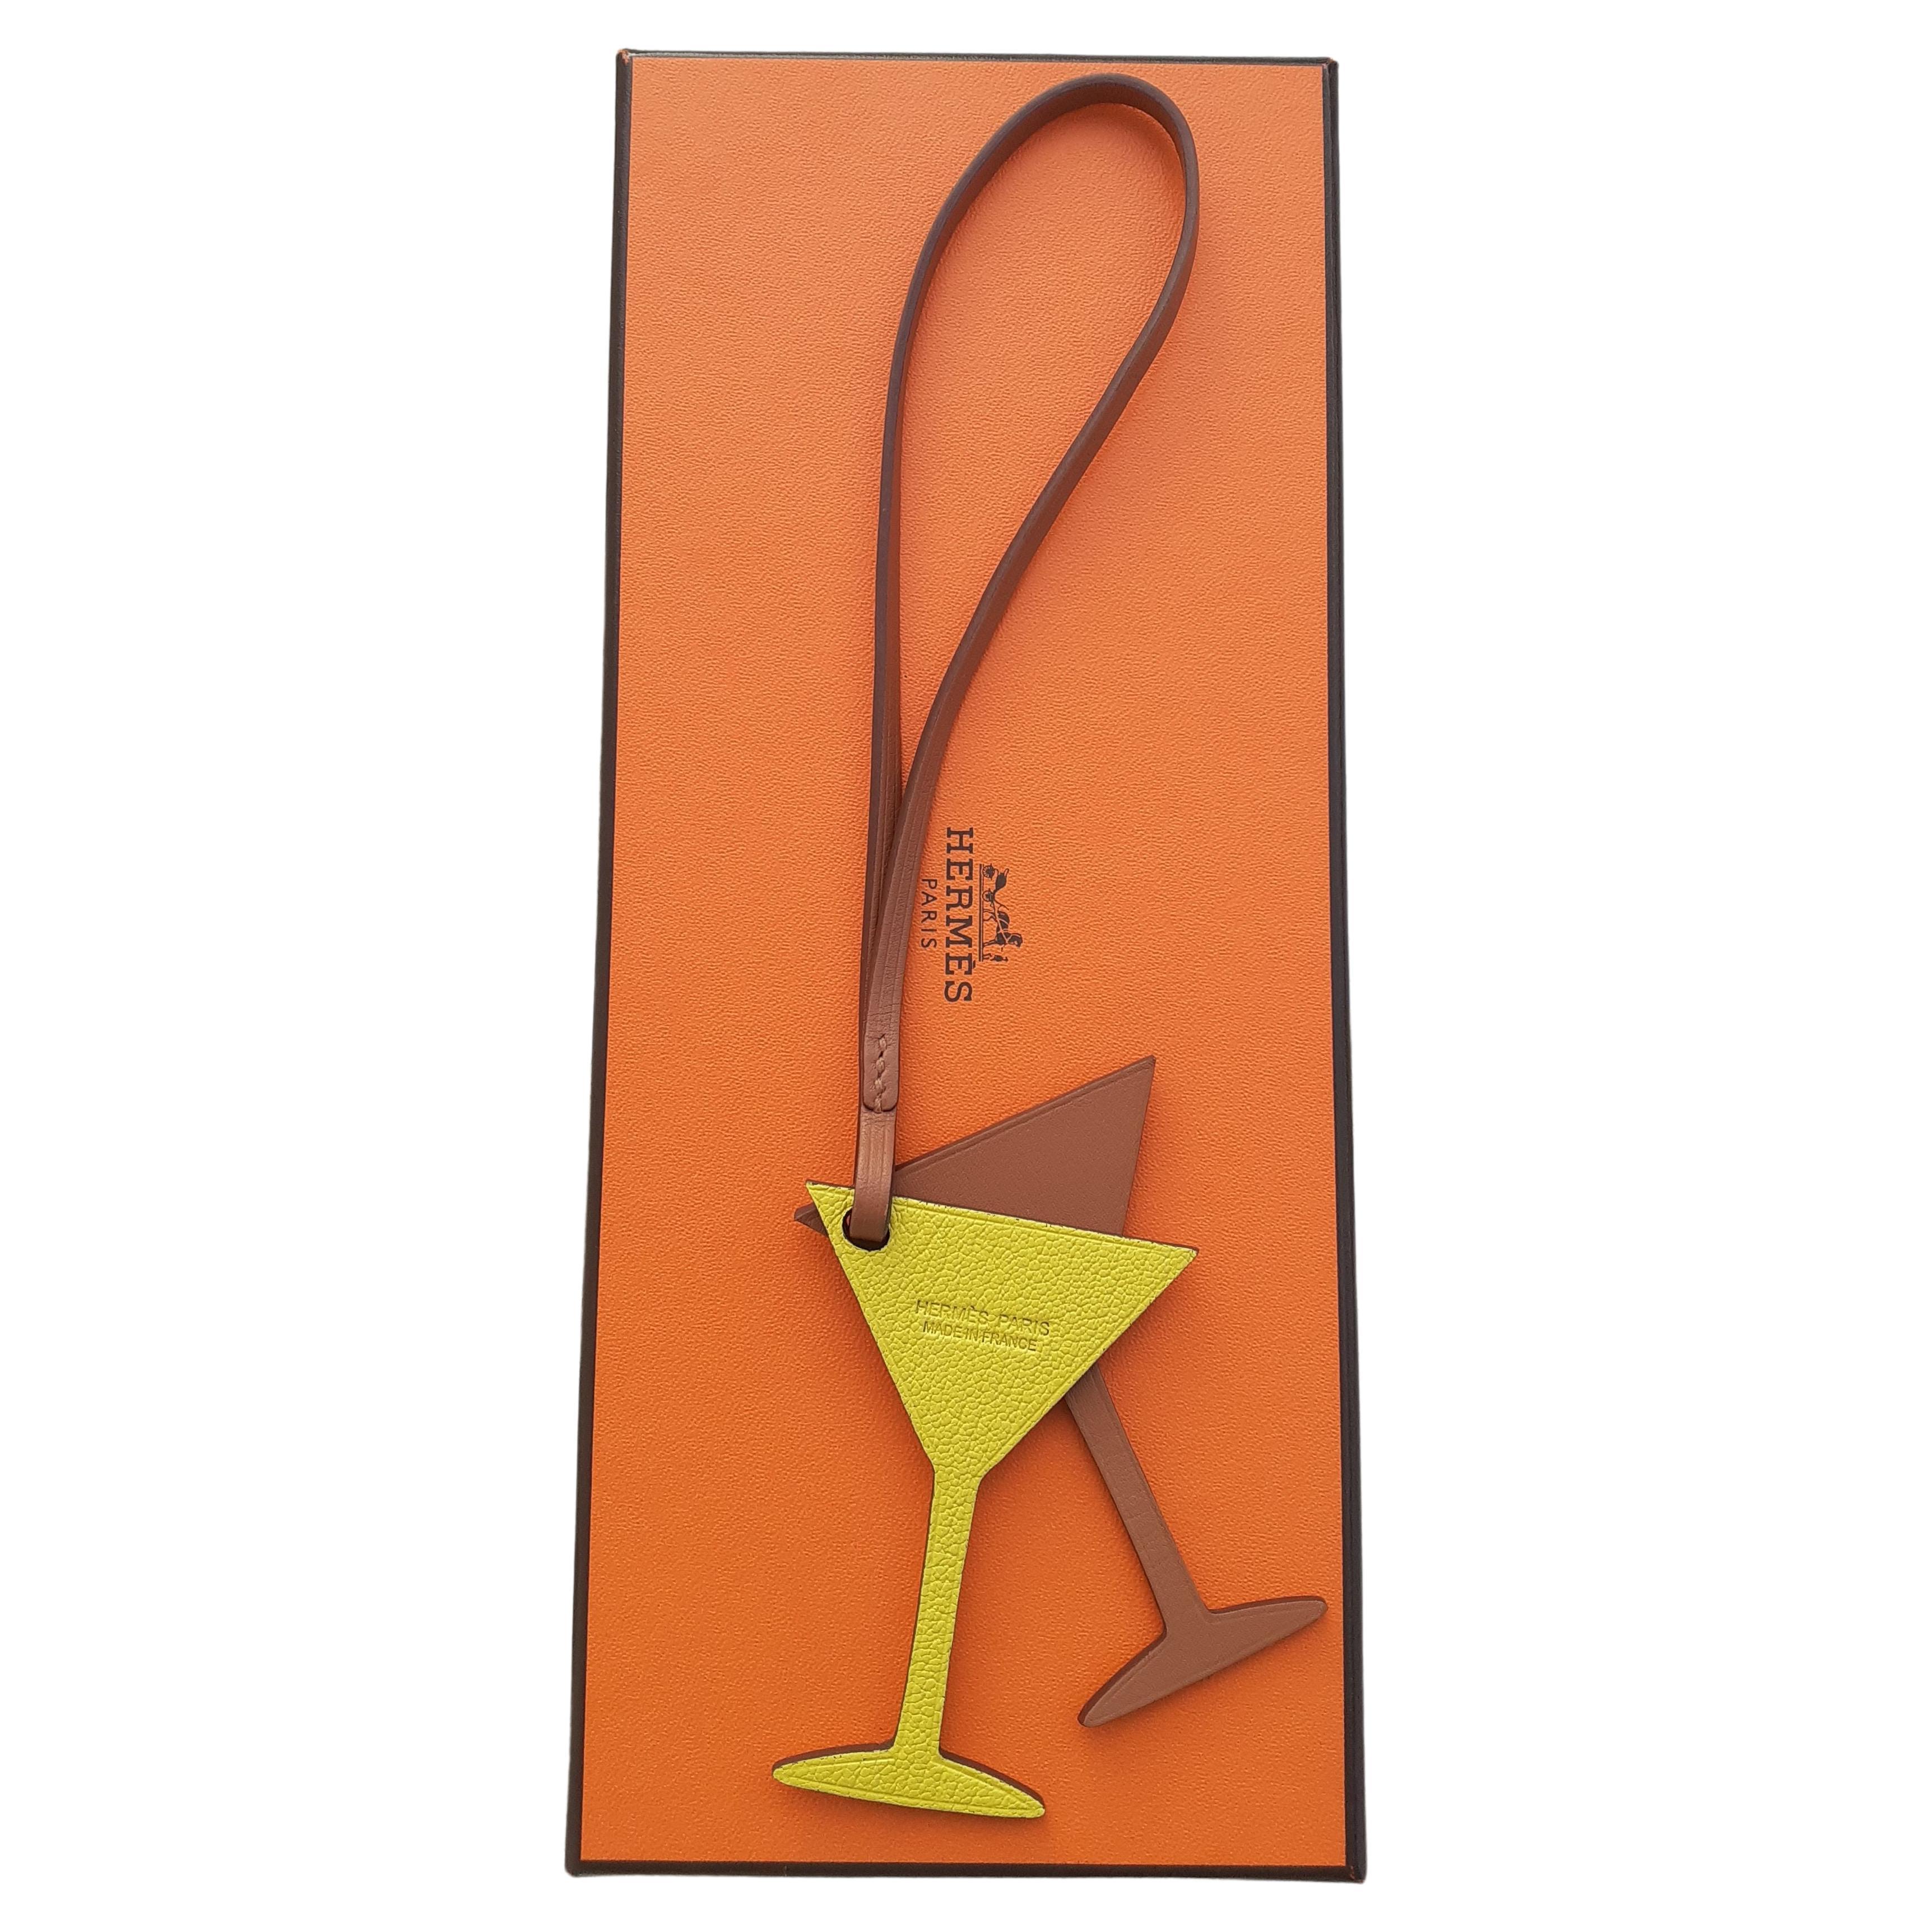 Rare Authentic Hermès Charm

In shape of 2 cocktail glasses

Made of swift and goat leathers

Colorways: Yellow / Brown

